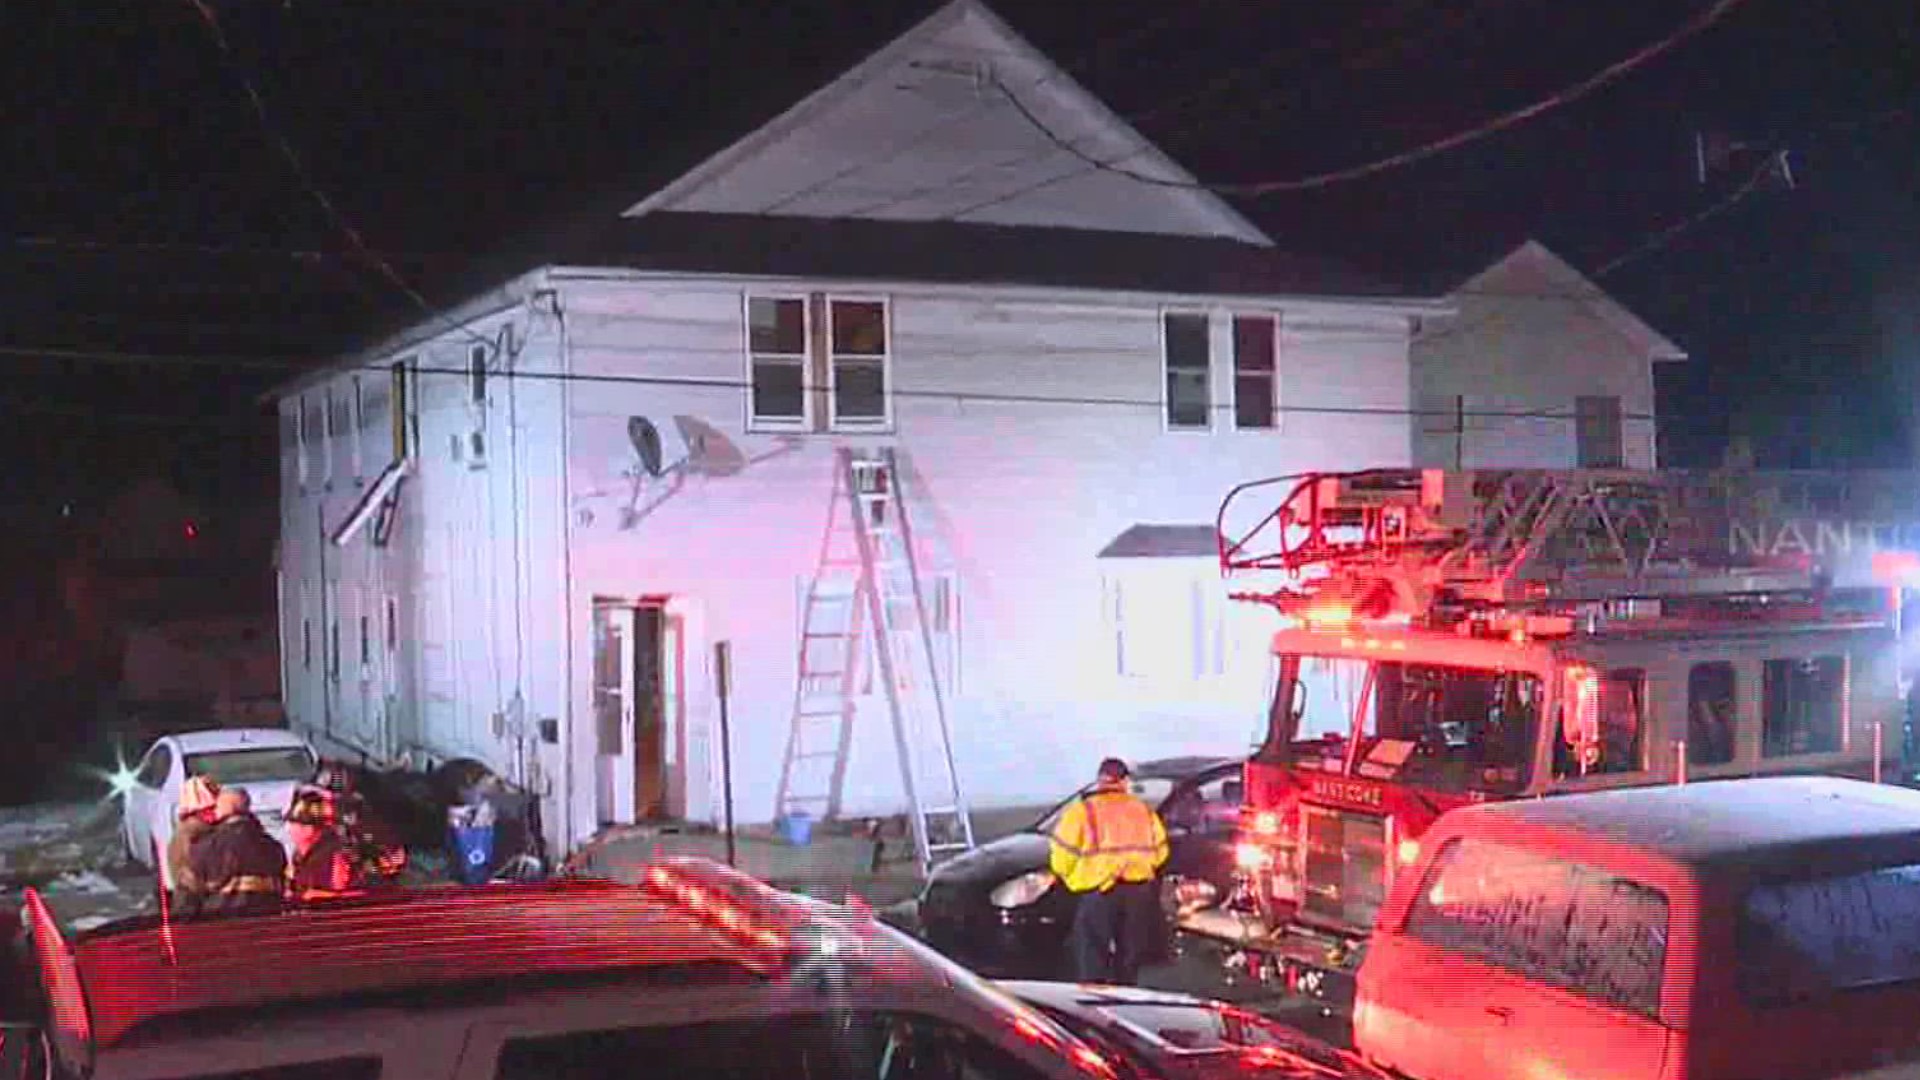 Crews quickly knocked down a fire early Thursday morning along Pine Street in Nanticoke.